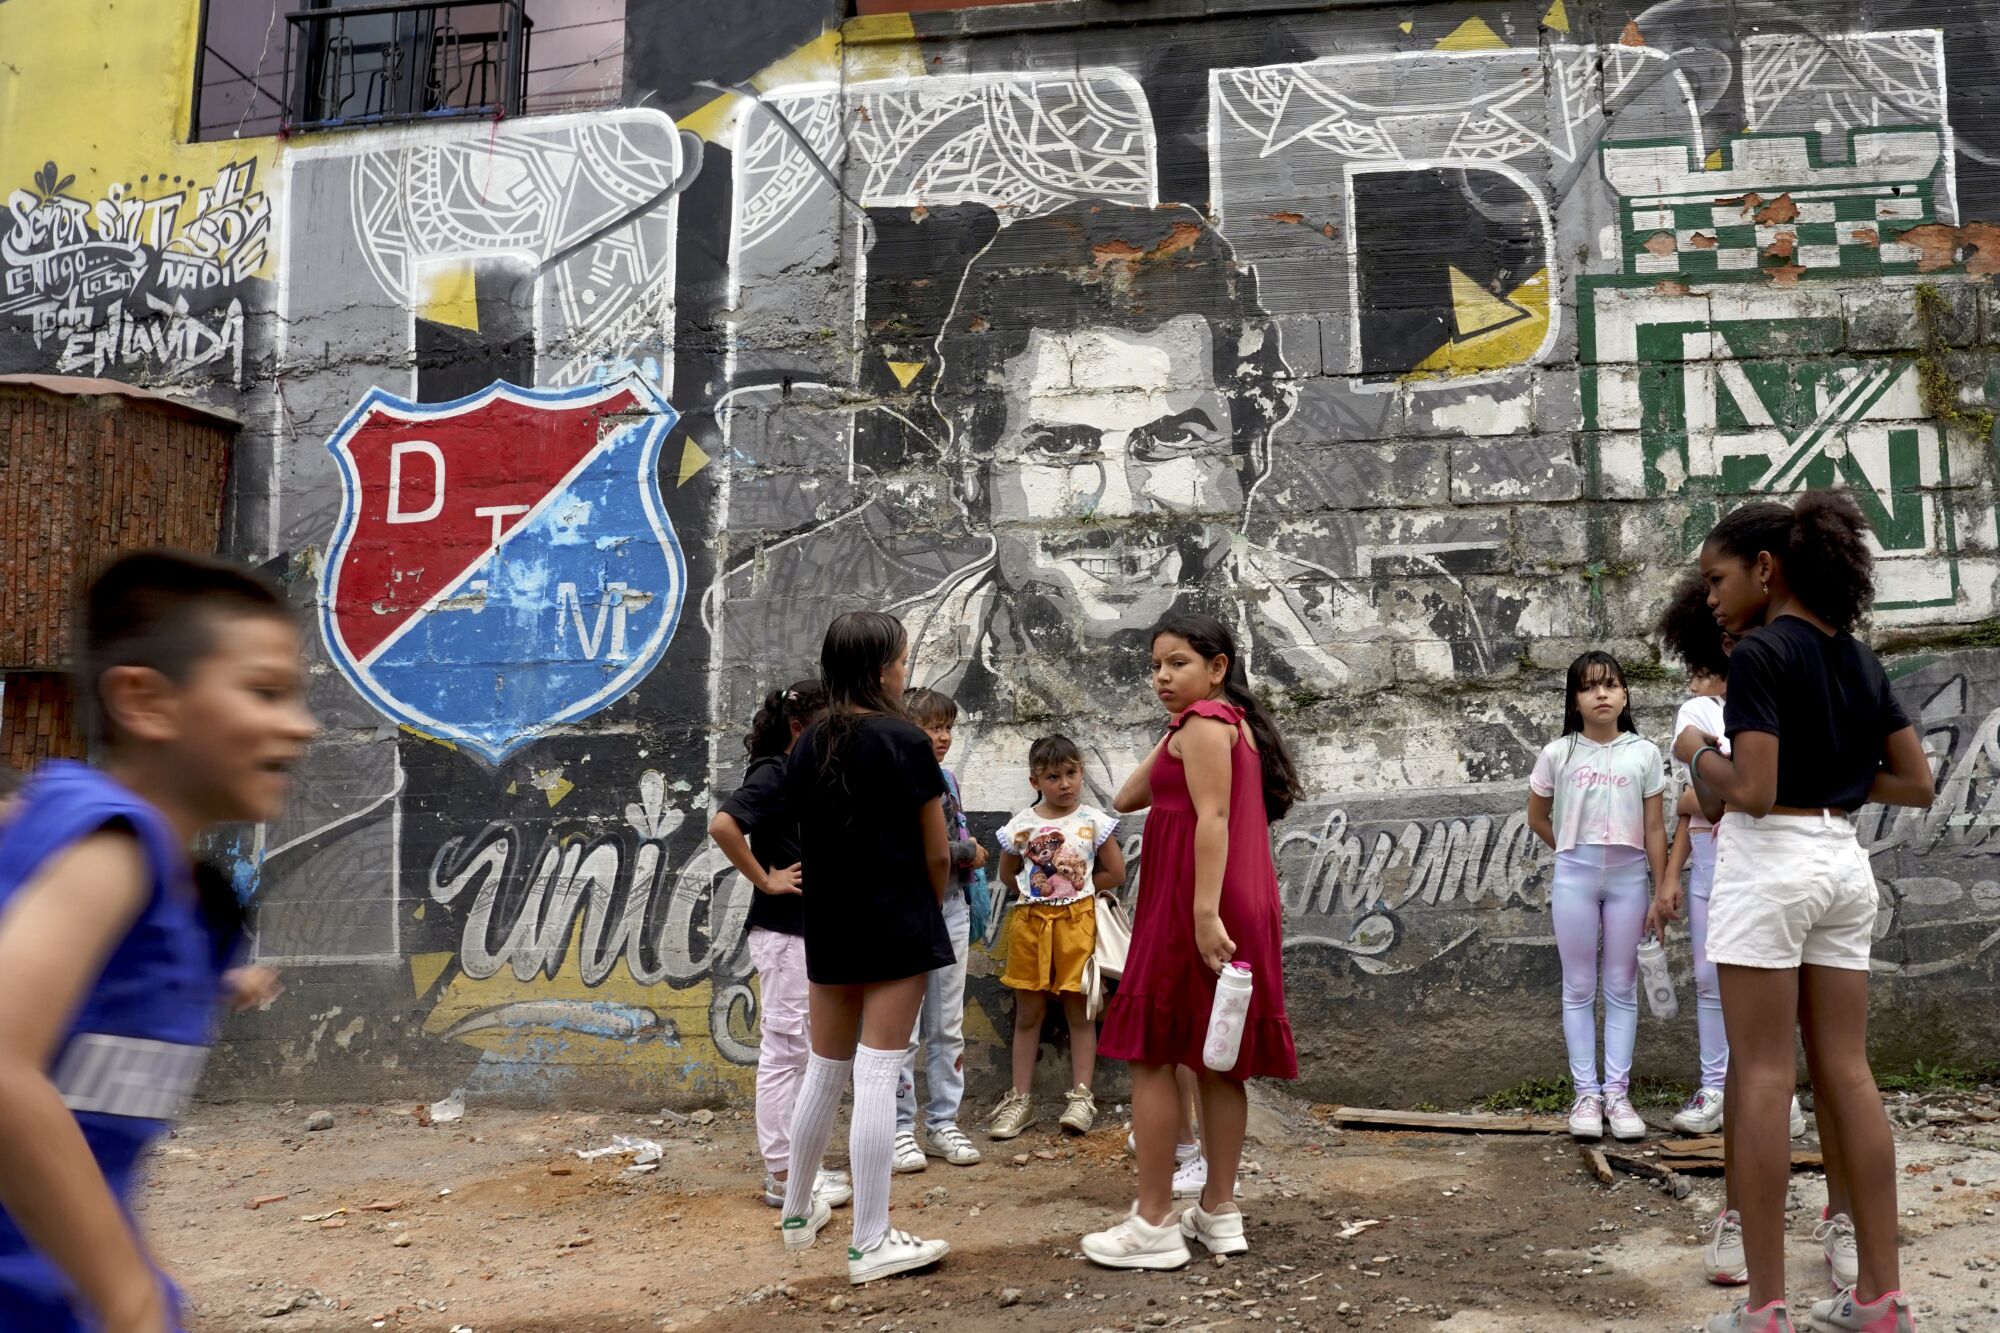 Pablo Escobar legacy draws tourism to Medellín, Colombia - Los Angeles Times